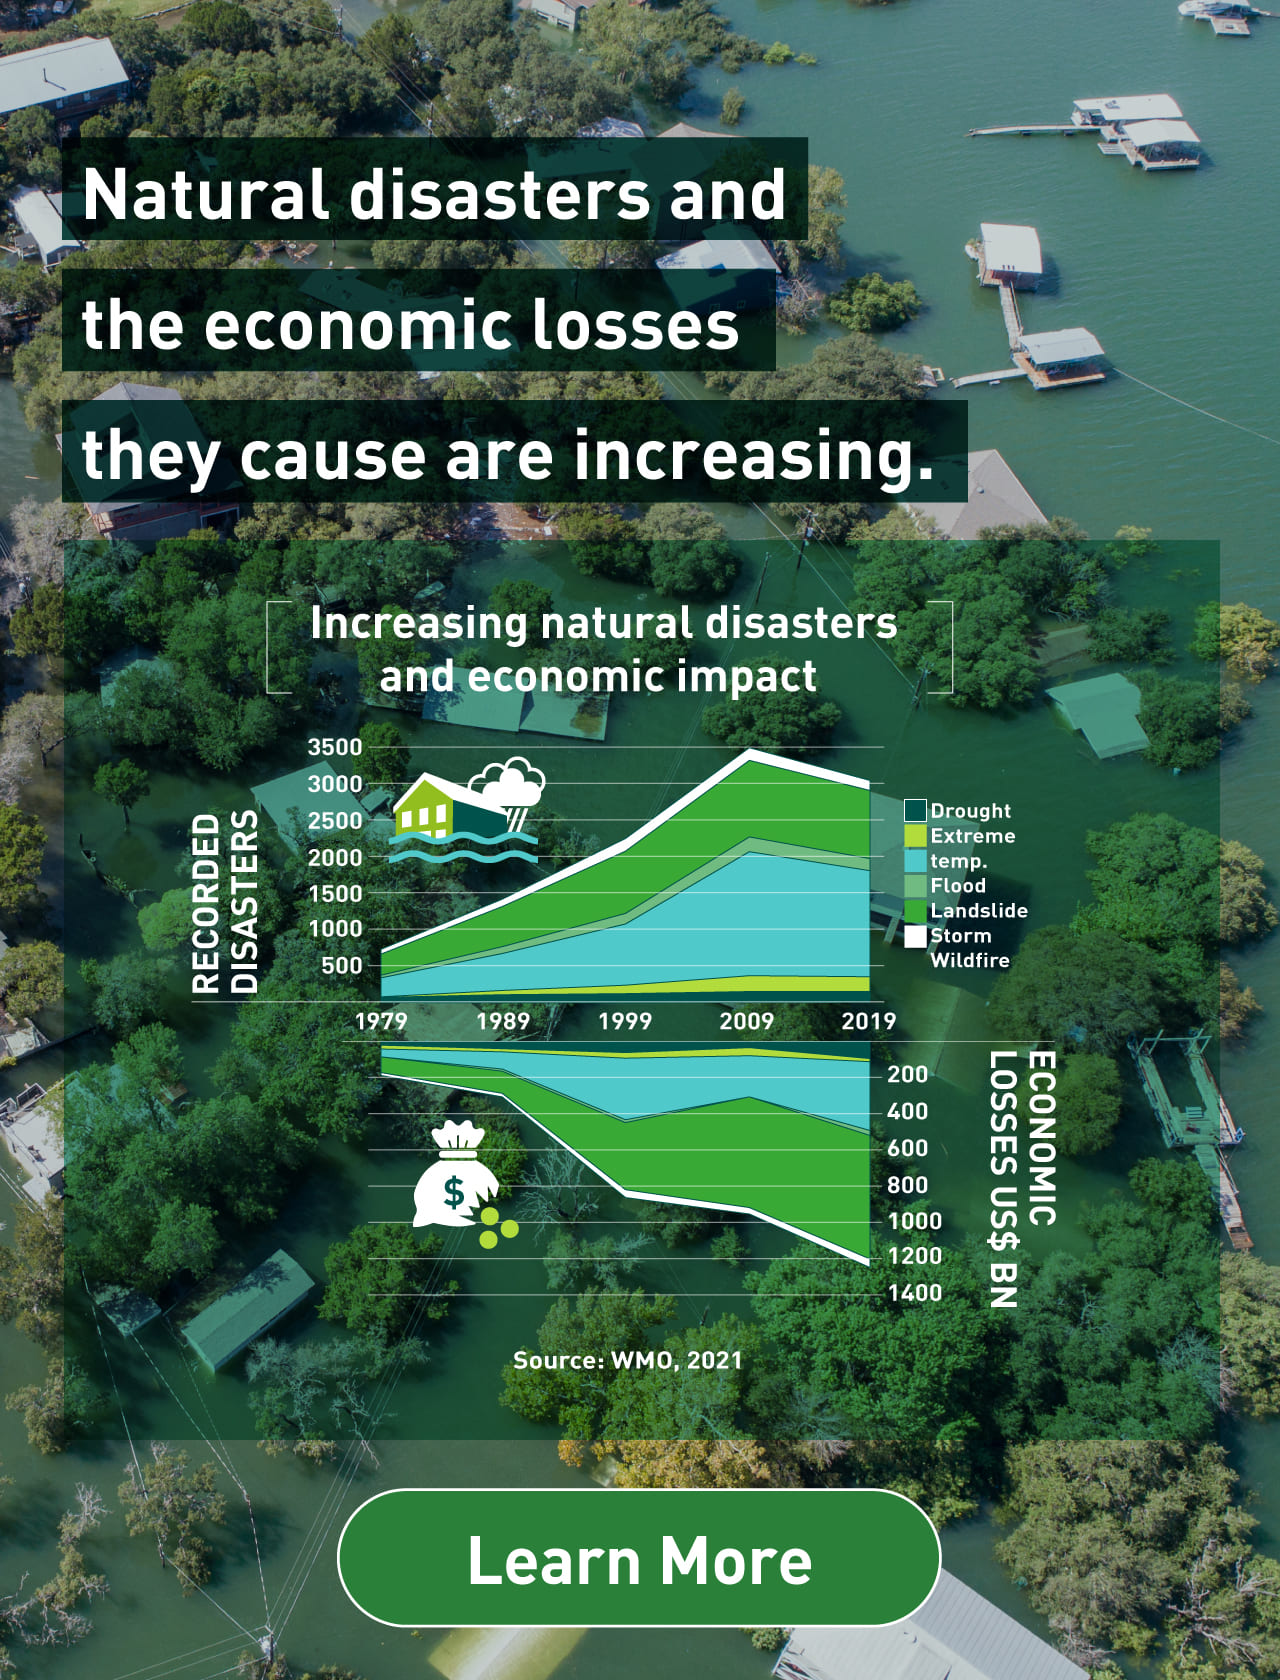 Natural disasters and the economic losses they cause are increasing. A line graph depicting the number of natural disasters and their economic losses. The incidence of disasters such as droughts, record temperatures, floods, landslides, storms, and wildfires continued to rise to 3,500 by 2009, with economic losses surpassing $1.2 trillion in 2019. Source: WMO, 2021 Background photo: Aerial view of a residential area flooded by water. Learn more.